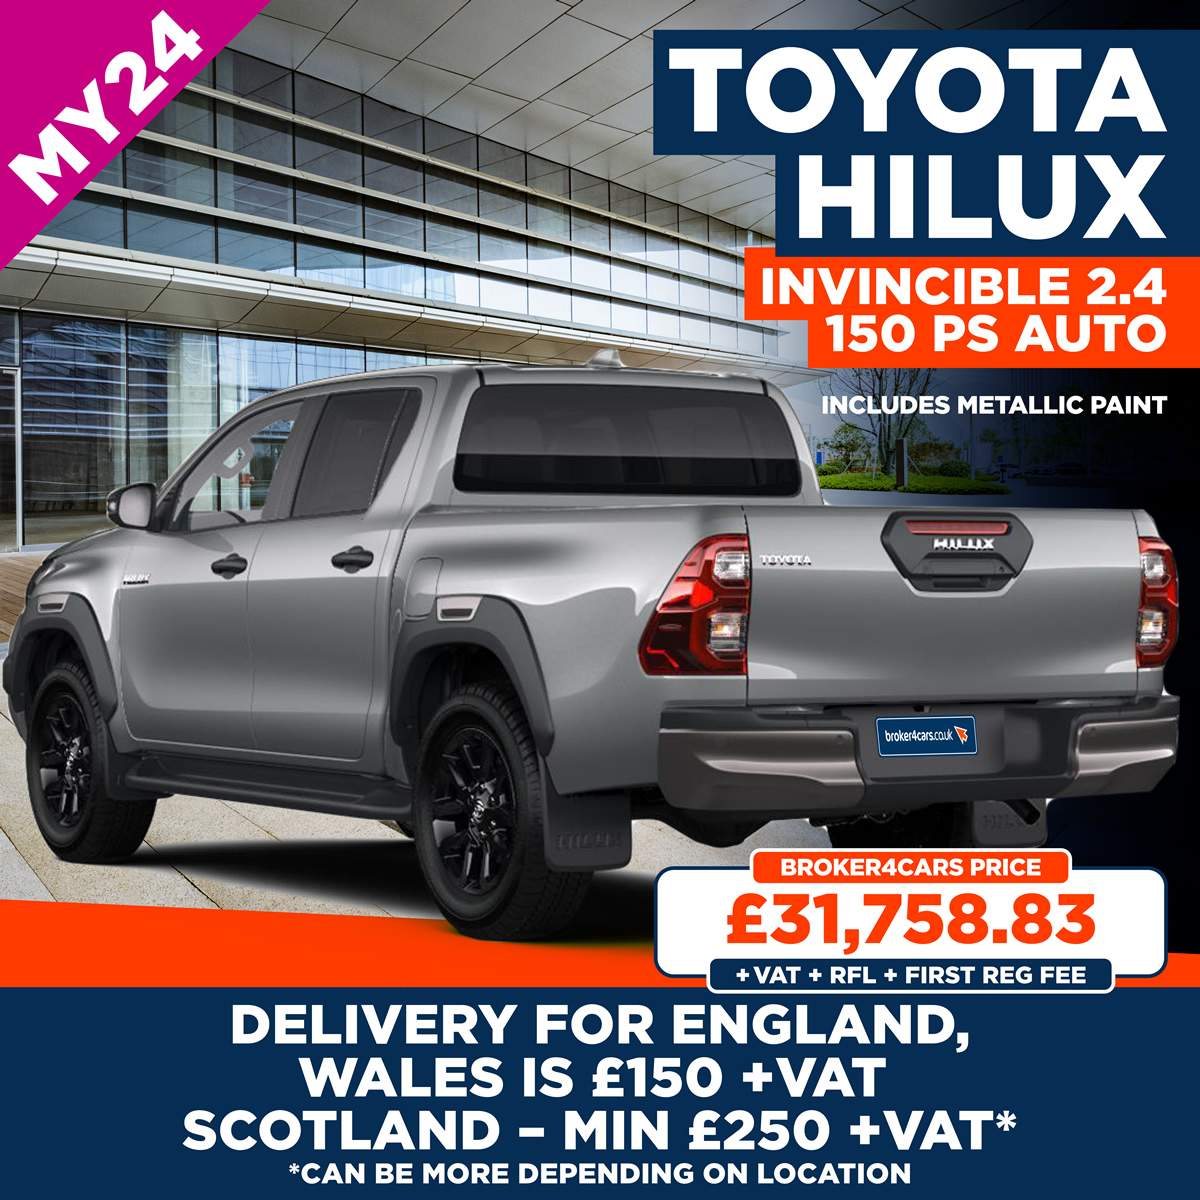 New MY24 Toyota Hilux Invincible 2.4 150 PS Auto includes metallic paint. Delivery for England and Wales is £150- plus VAT. Scotland – Min £250 plus VAT, but can be more depending on location. £31,758.83  +VAT + RFL £335+ First Reg Fee £55